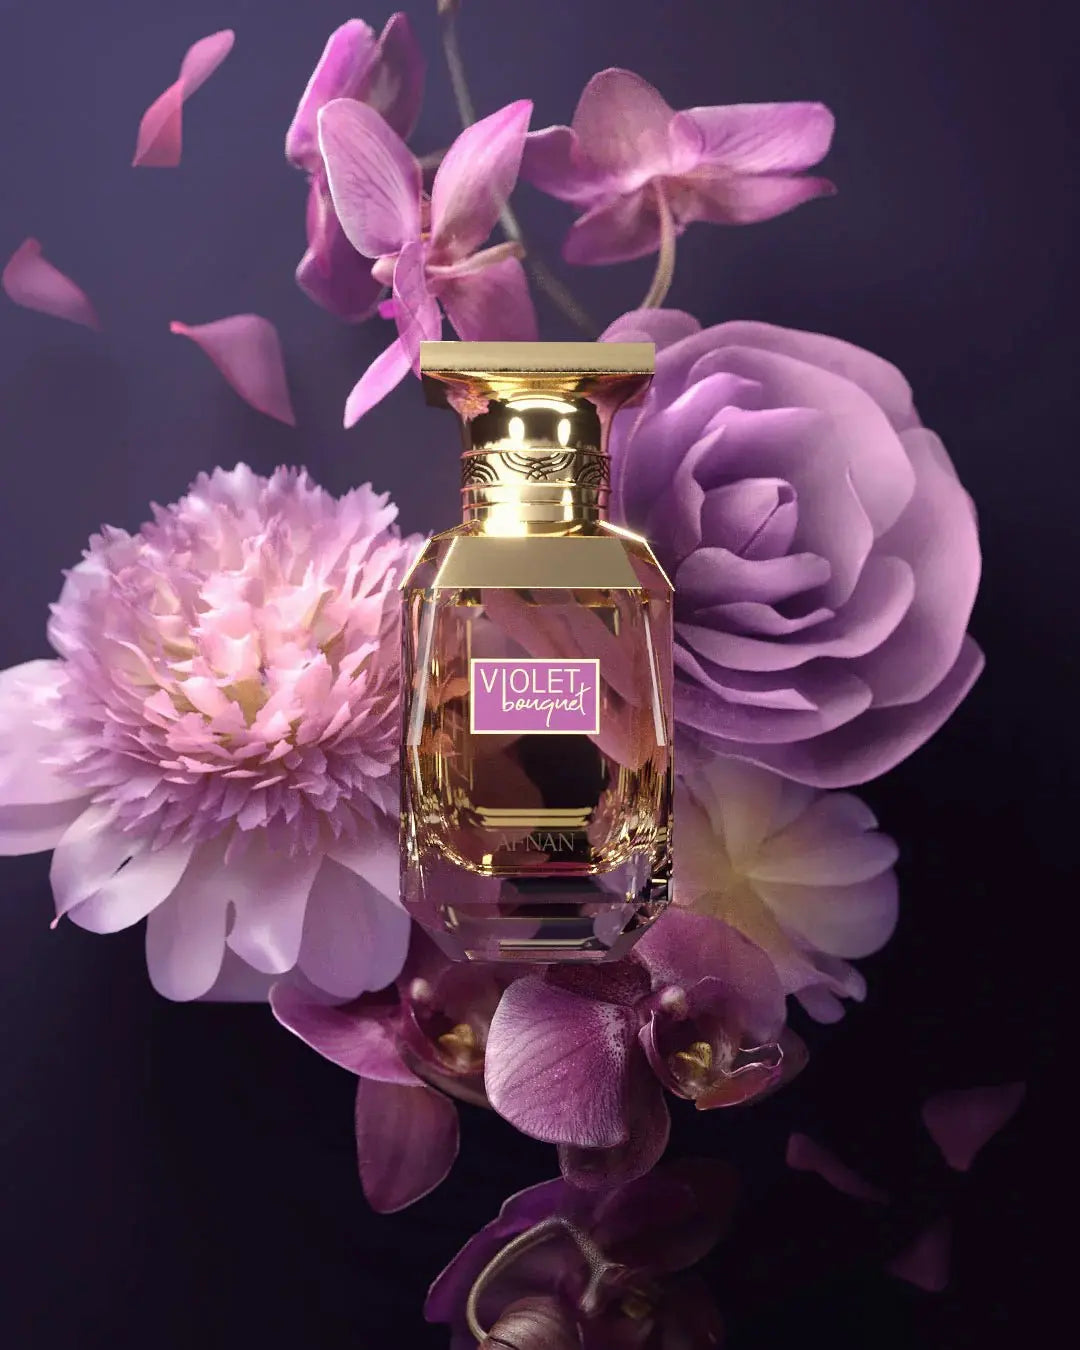 The image showcases a perfume bottle amidst an arrangement of purple flowers on a dark background. The bottle has a clear glass design with geometric faceting at the base, a polished gold cap, and a braided gold band around the neck. A purple label on the bottle displays "VIOLET BOUQUET" in white text, with the brand name "AFNAN" just below it.